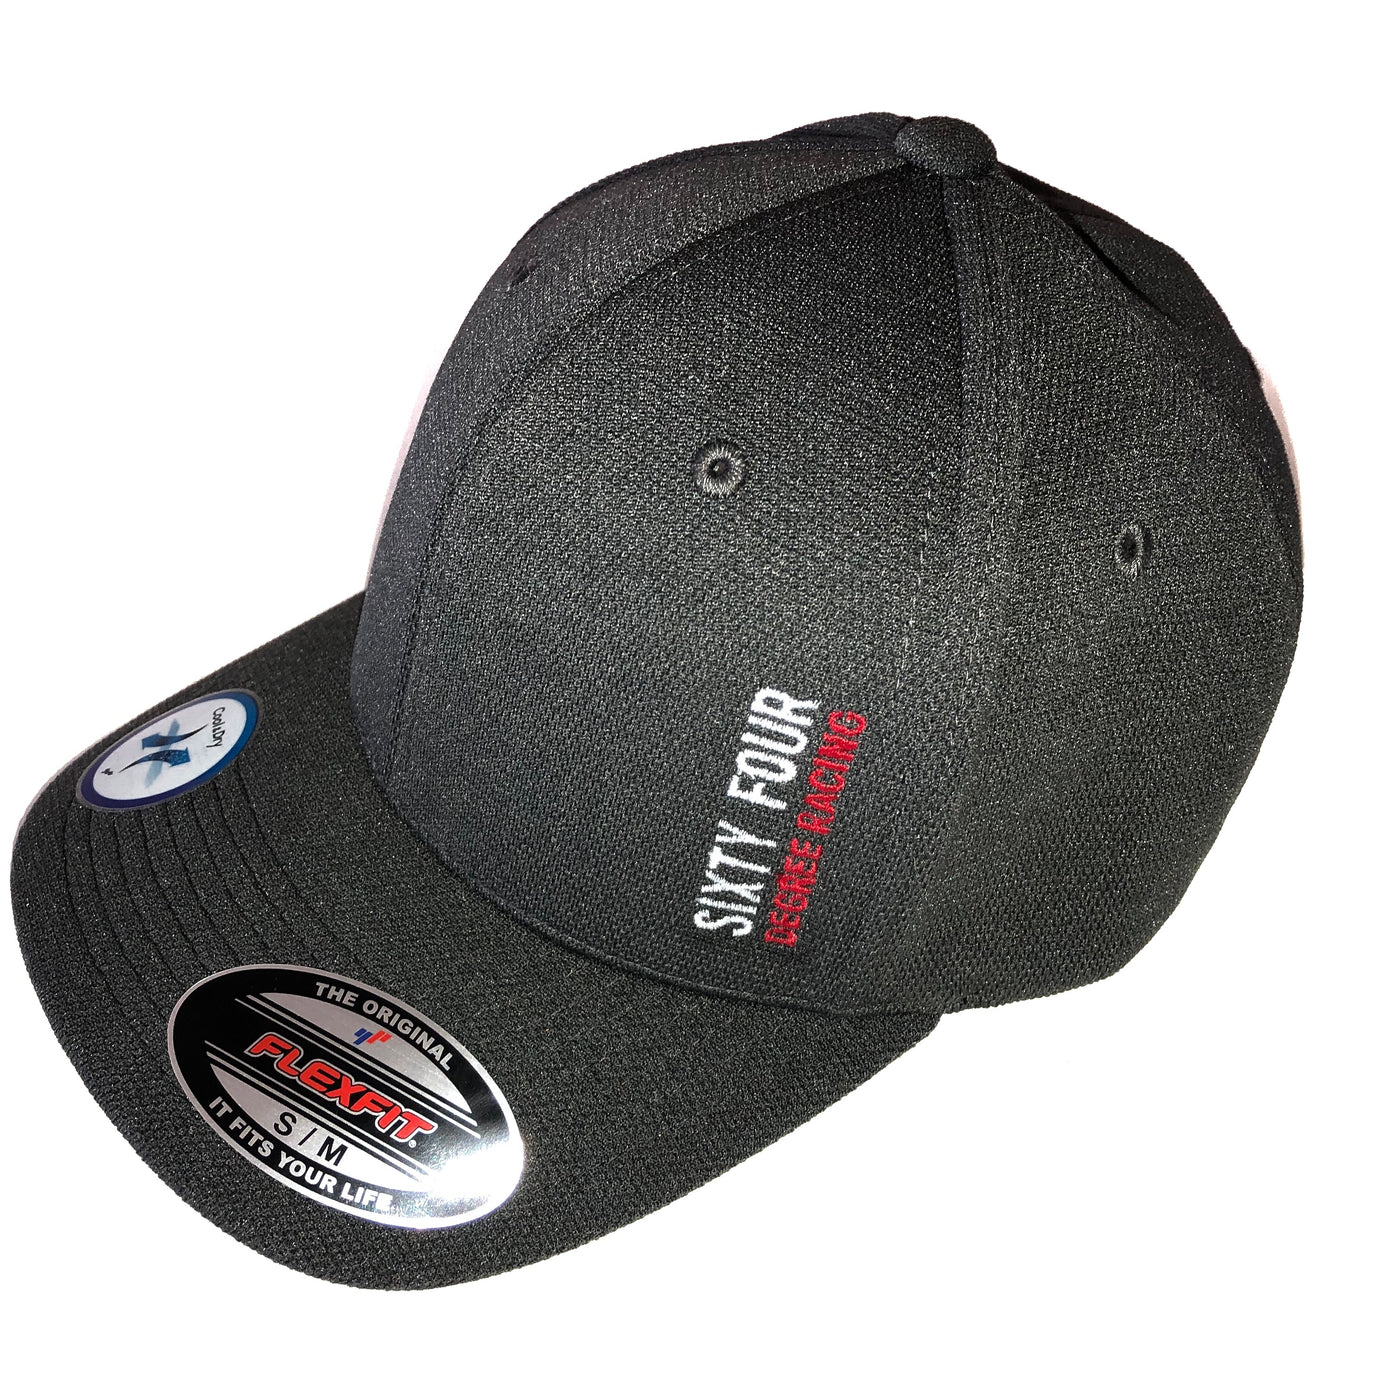 Embroidered 64 Degree Racing Hat